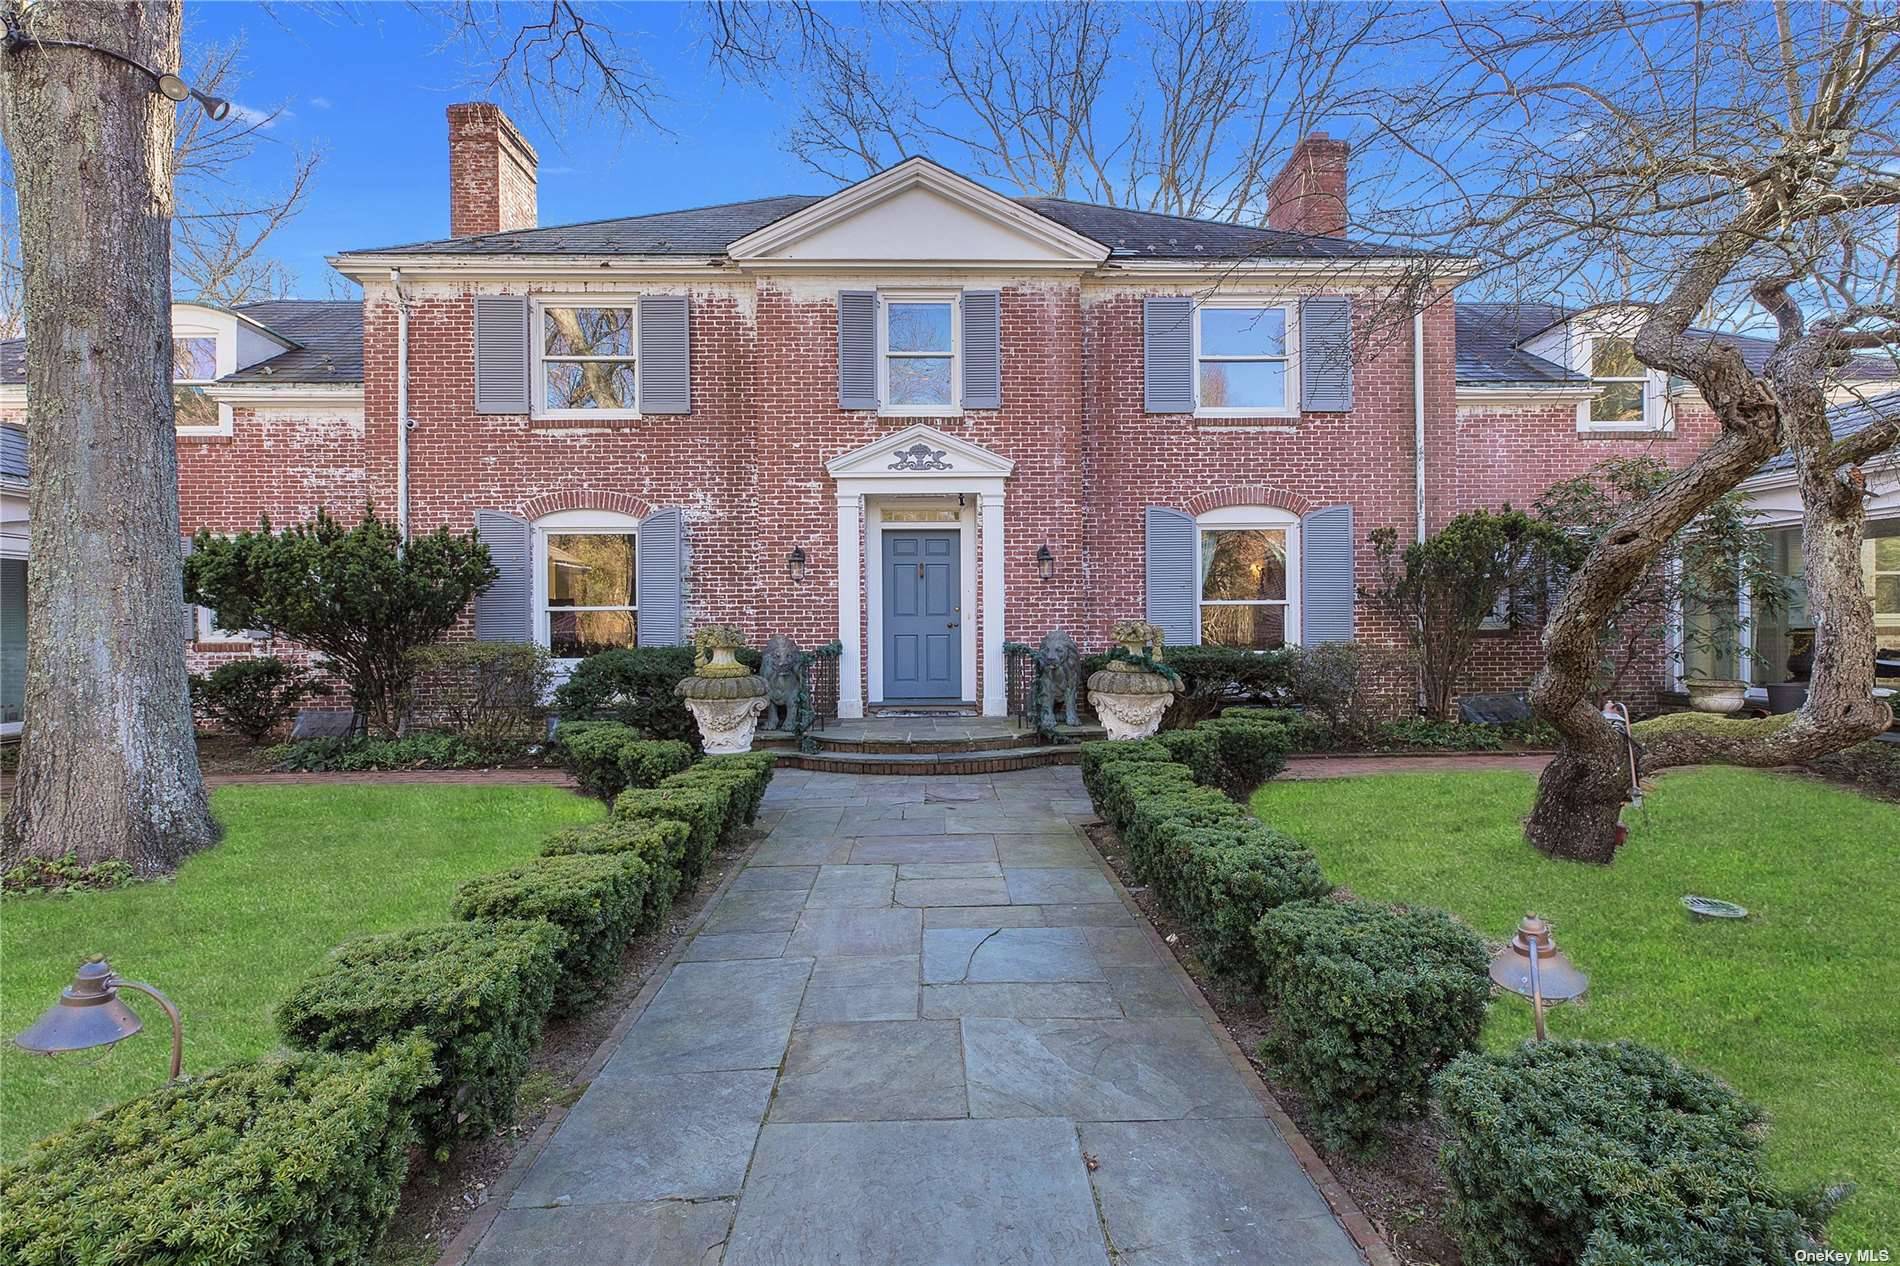 Sitting on a vast 14. 5 acres of land lies the opportunity to build 2 additional homes on the lot along with this amazing 6000 Sq Ft timeless brick colonial ...